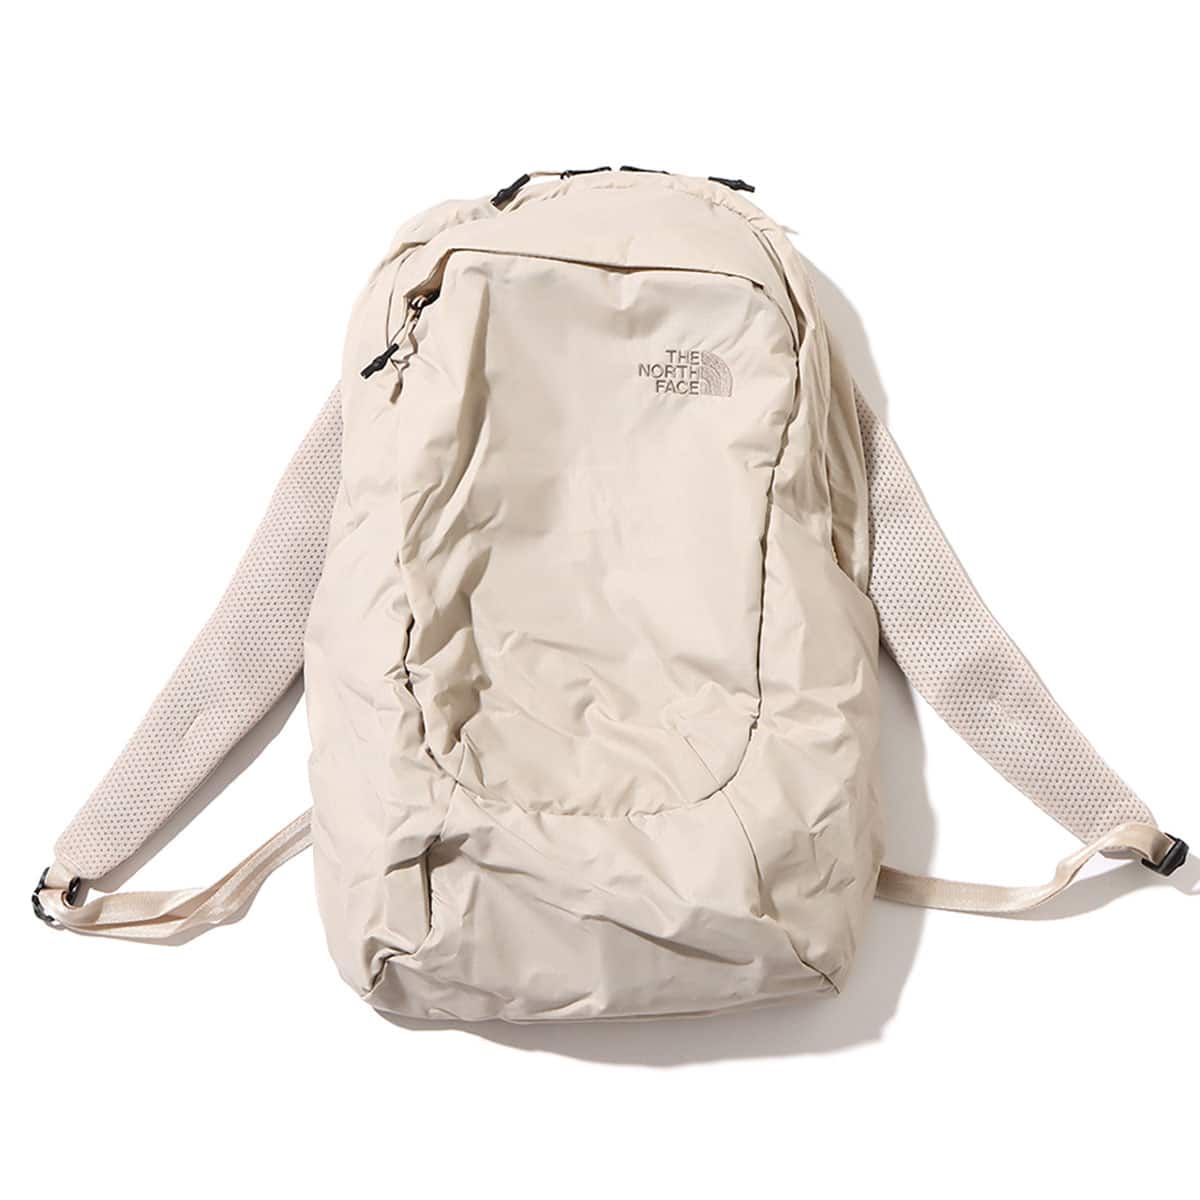 THE NORTH FACE GLAM DAYPACK フォッシルアイボリー 23SS-I